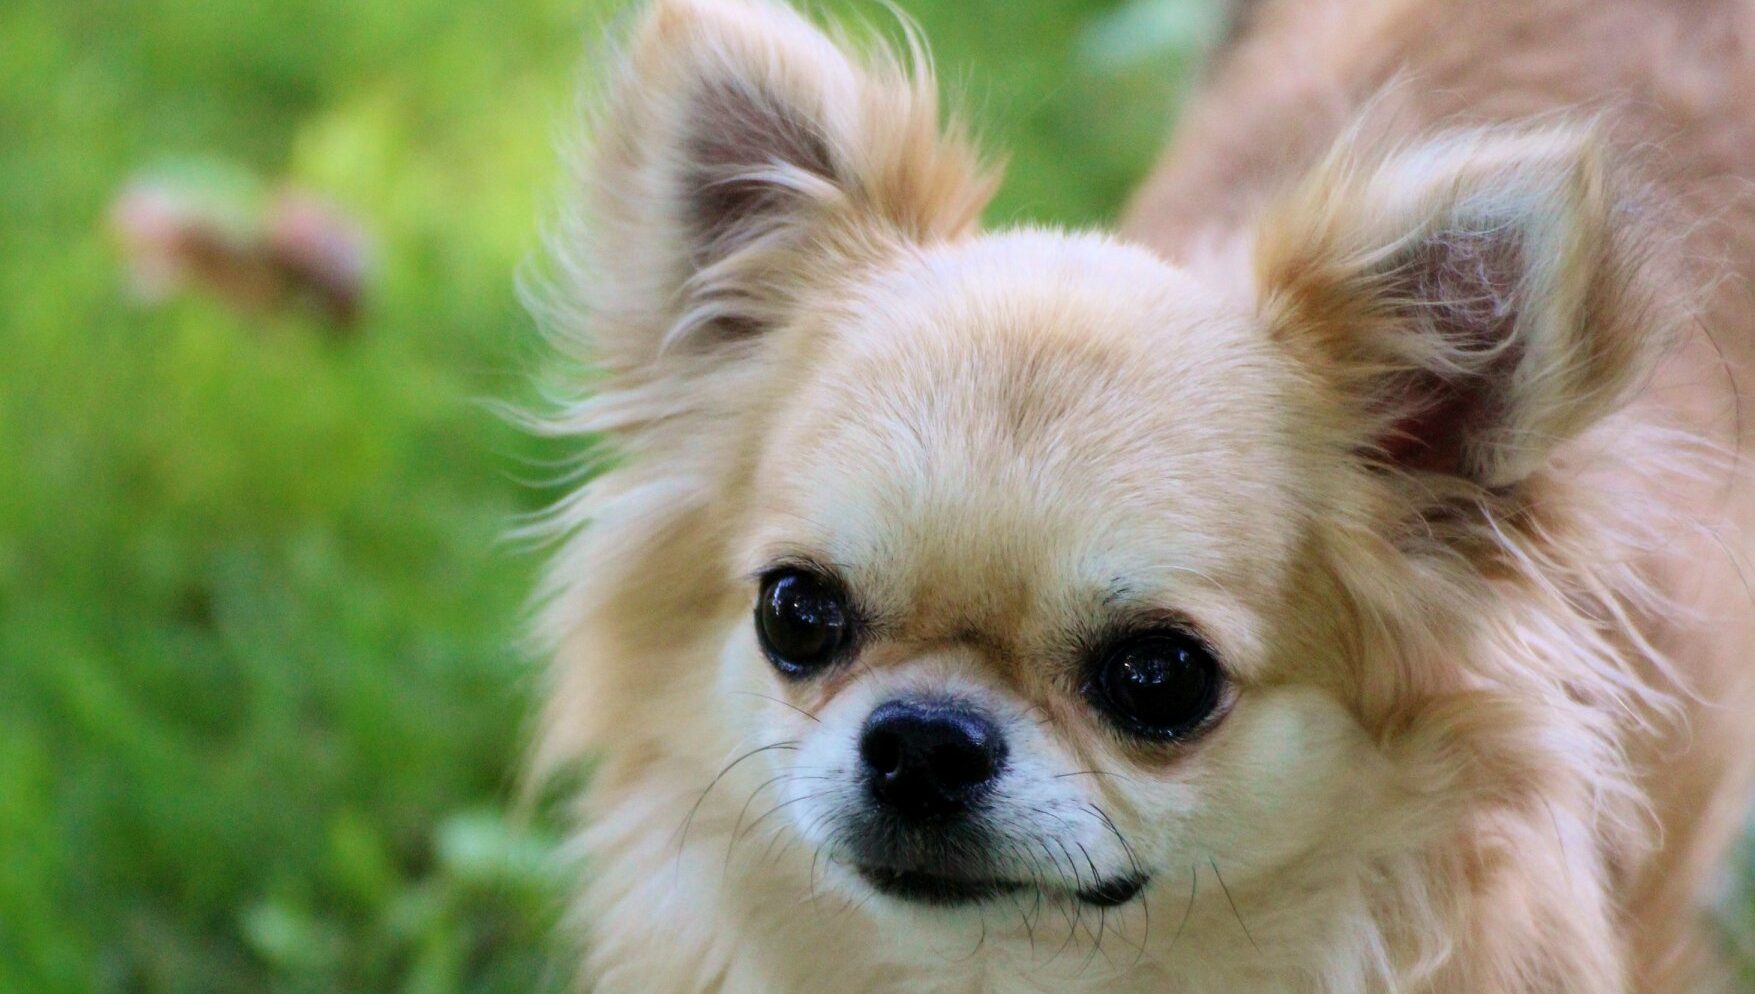 Chihuahuas for sale